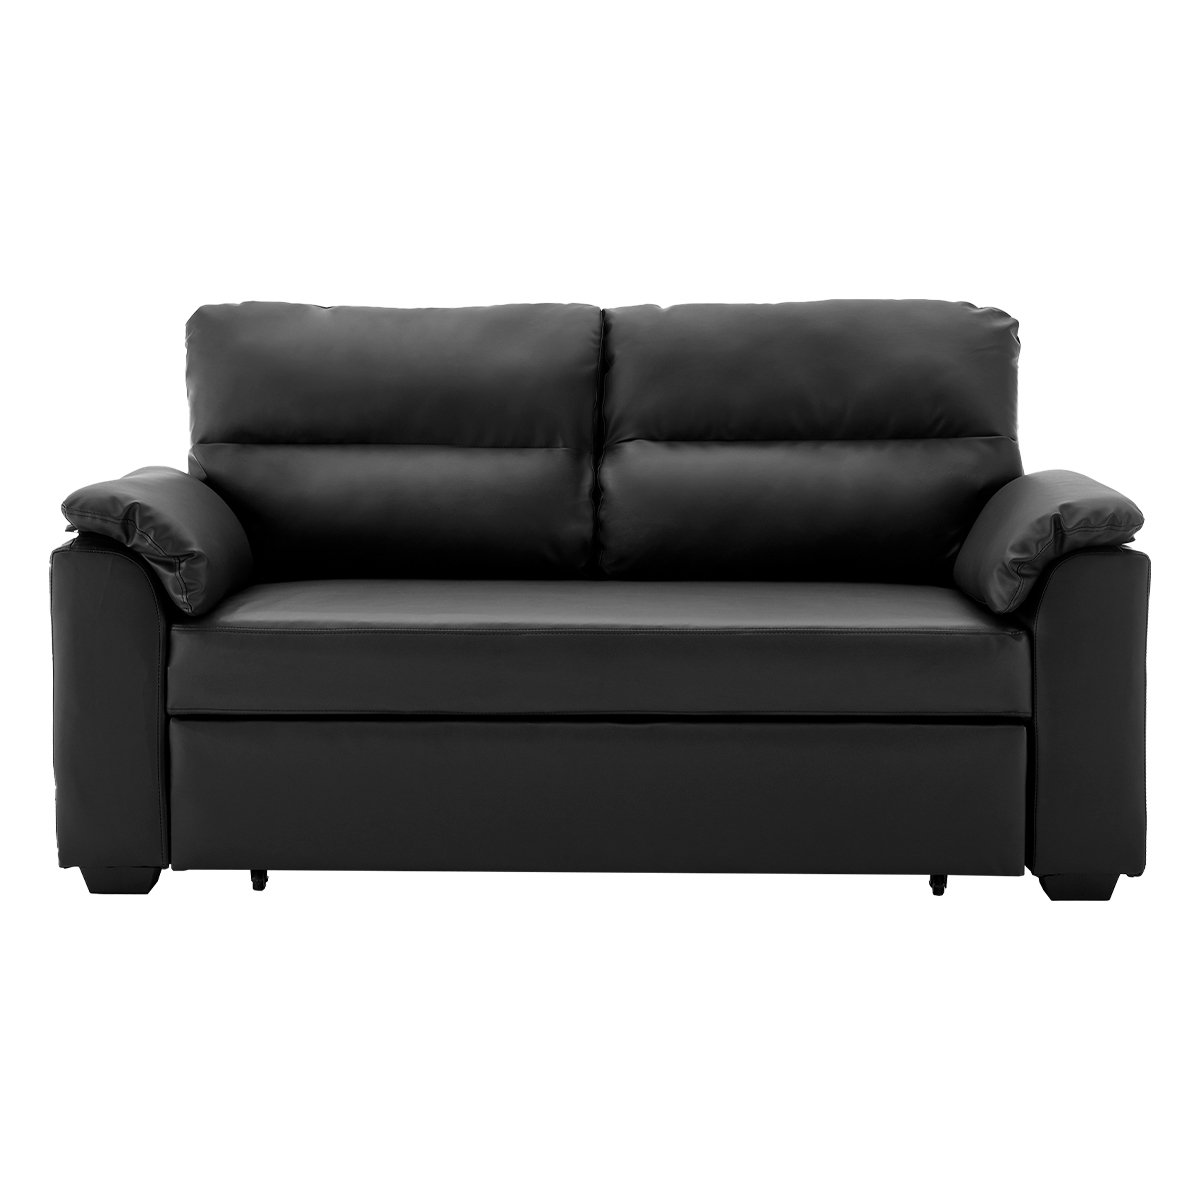 Sarantino Faux Leather Sofa Bed Couch Lounge - Black 2